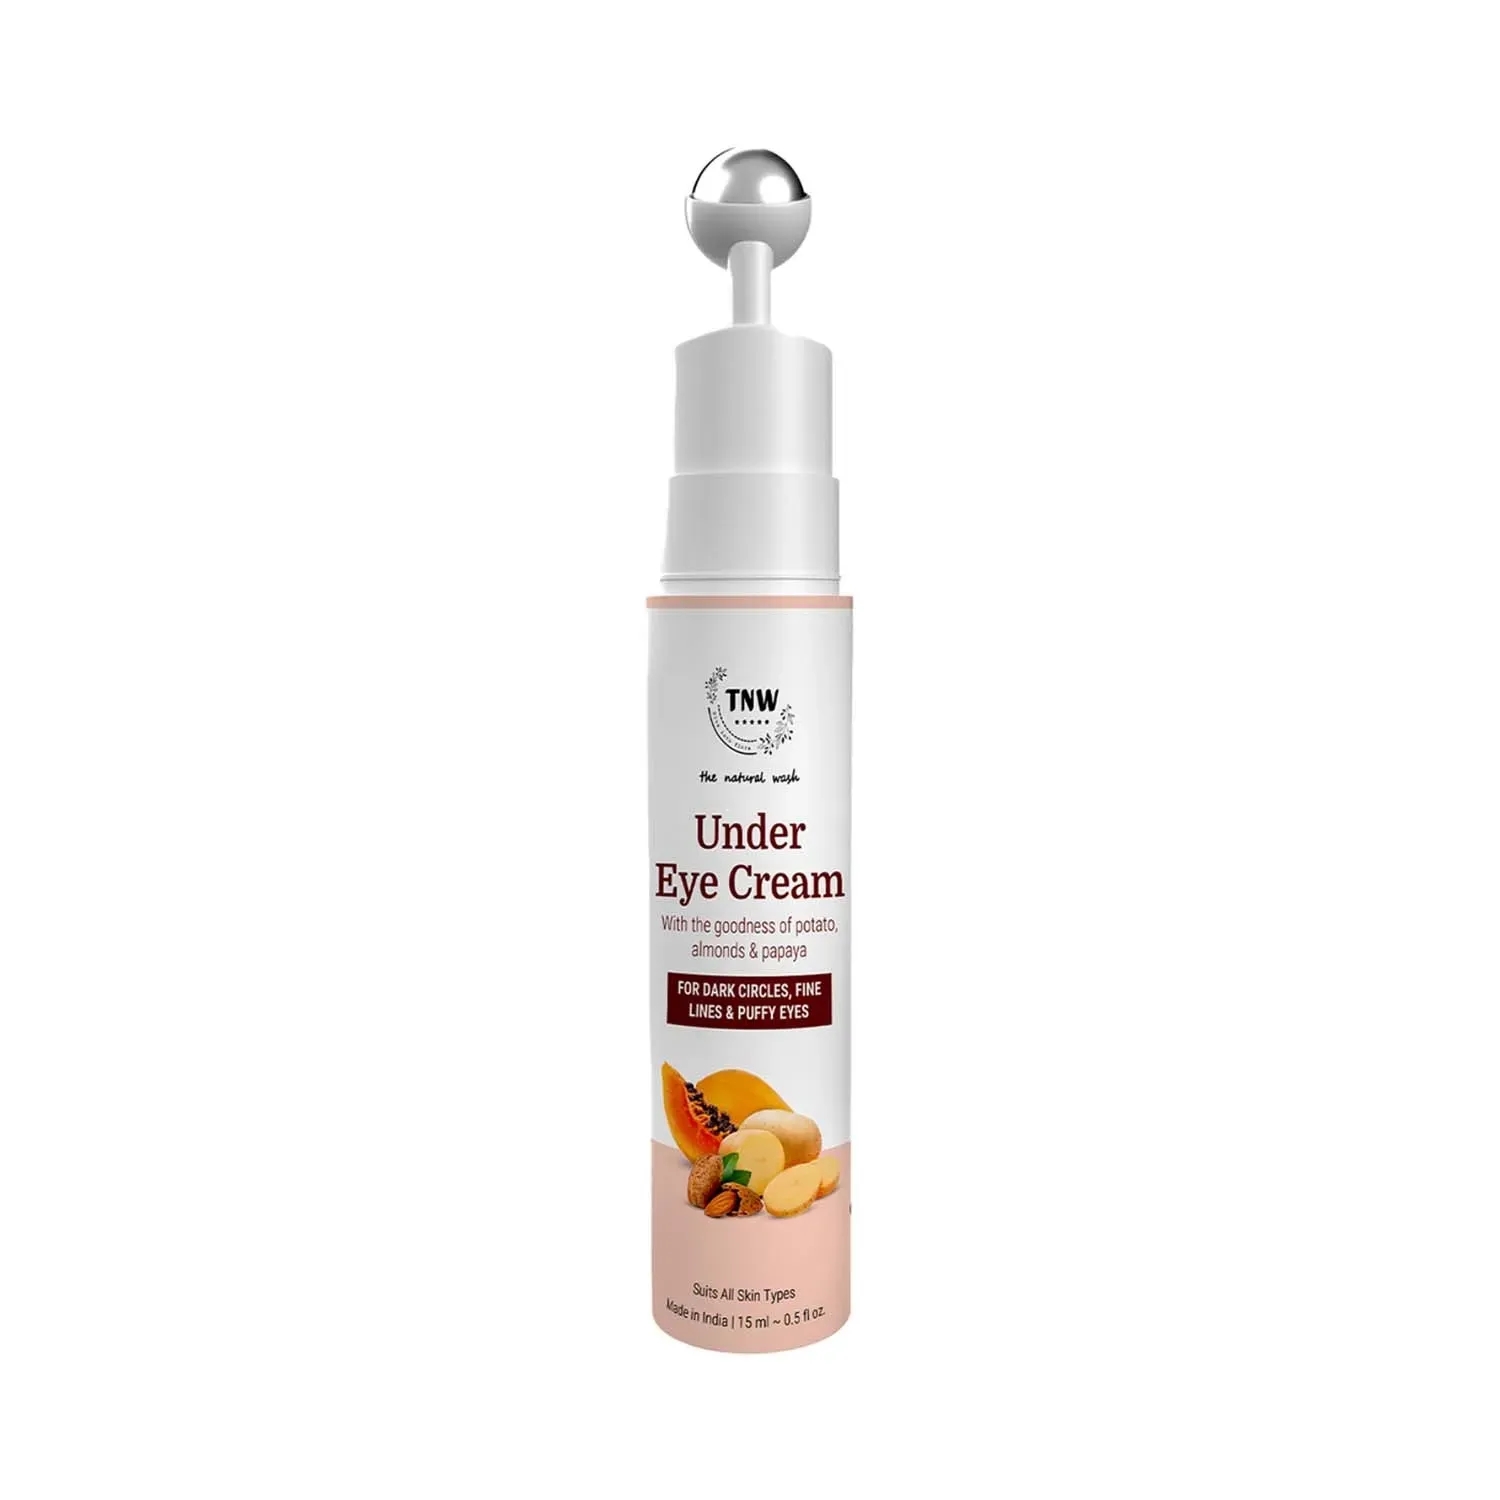 TNW The Natural Wash Under Eye Cream with Cooling Massage Roller (15ml)